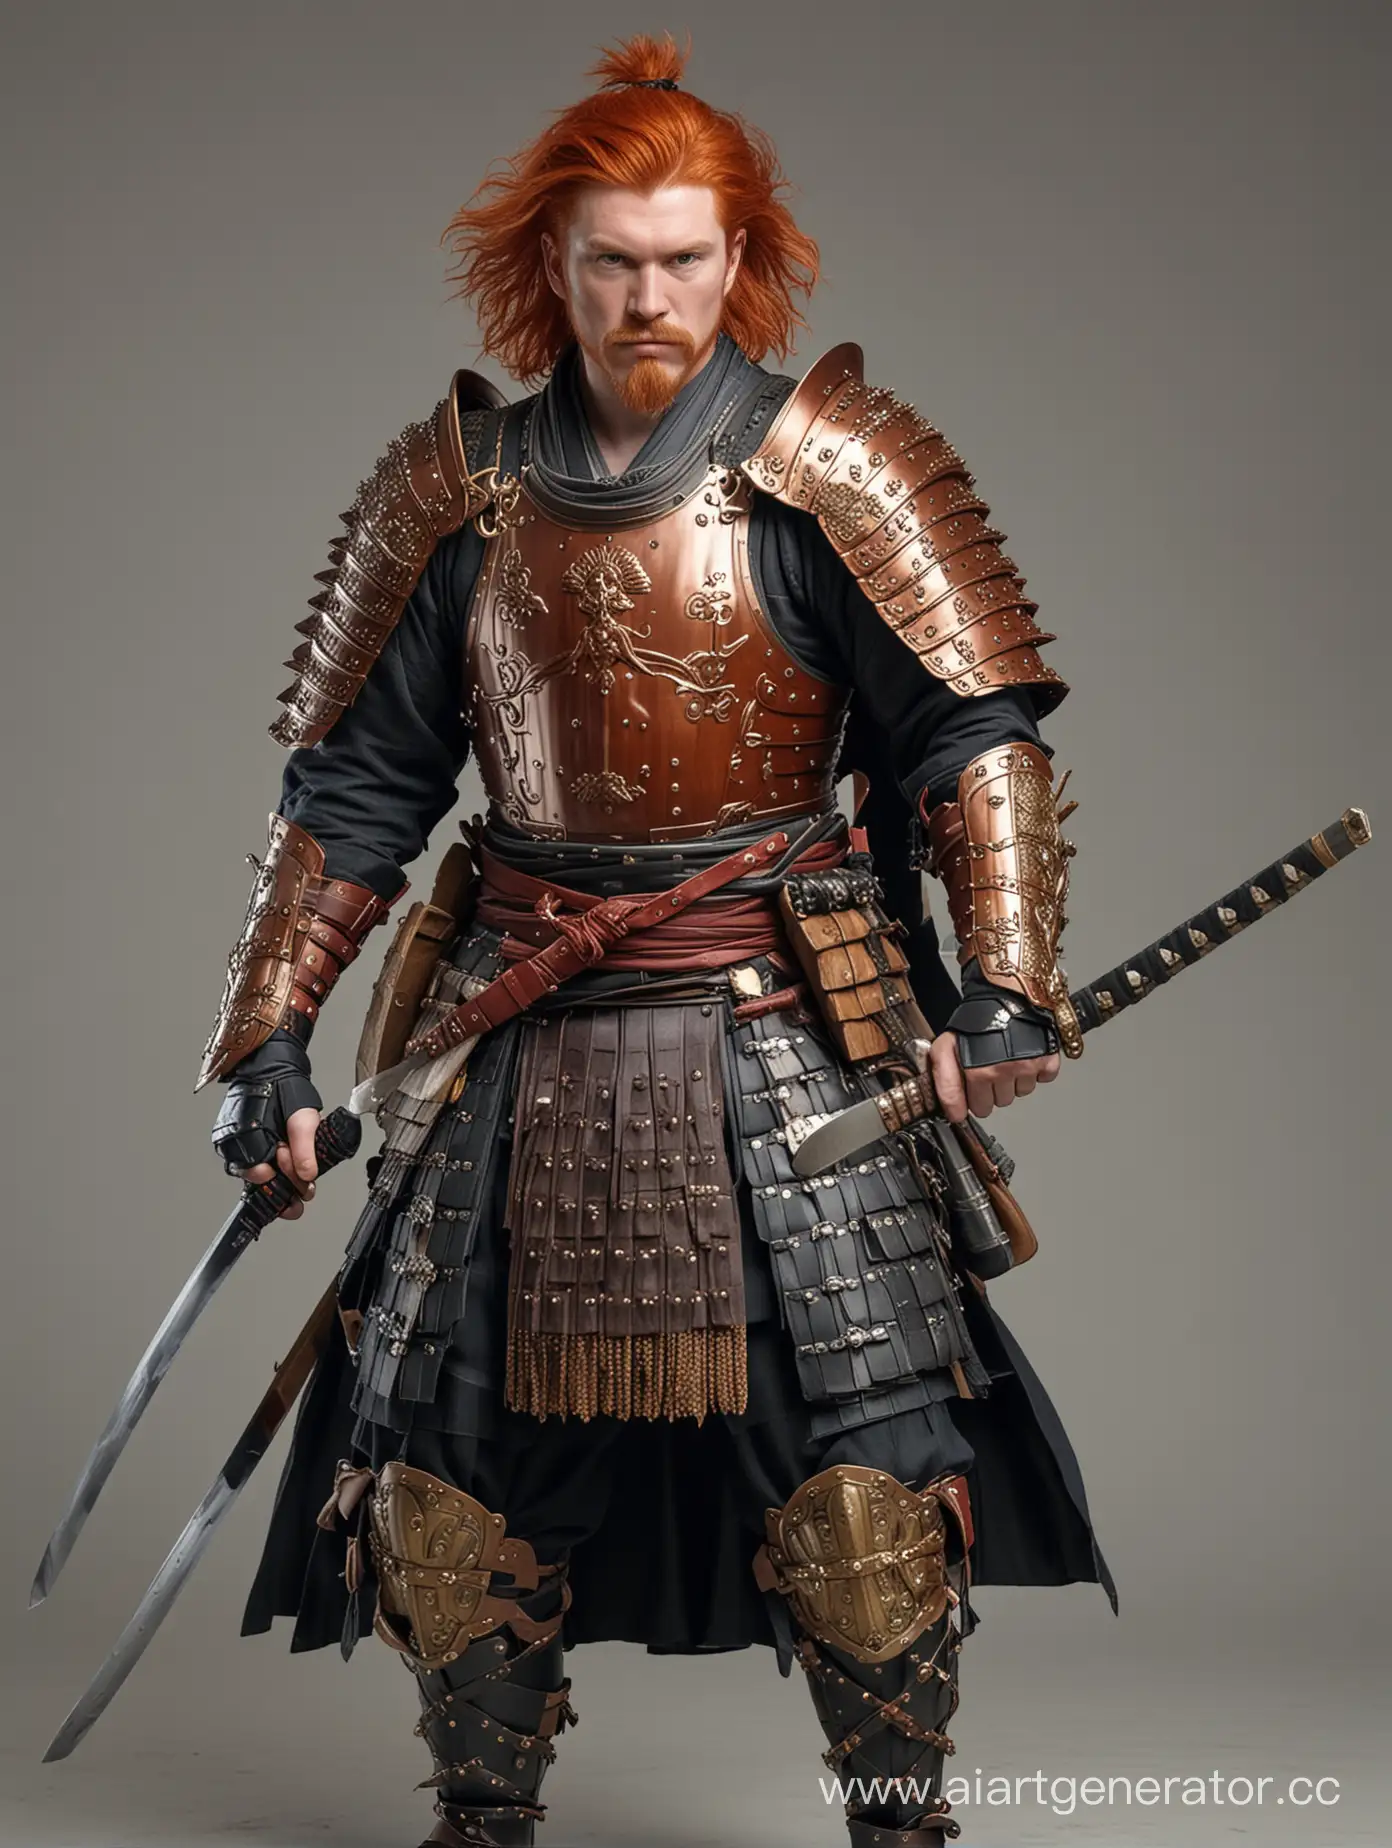 a Scottish medieval red-haired warrior in armor, with elements of a Japanese daimyo costume, full-length, with katanas and two-handed medieval swords